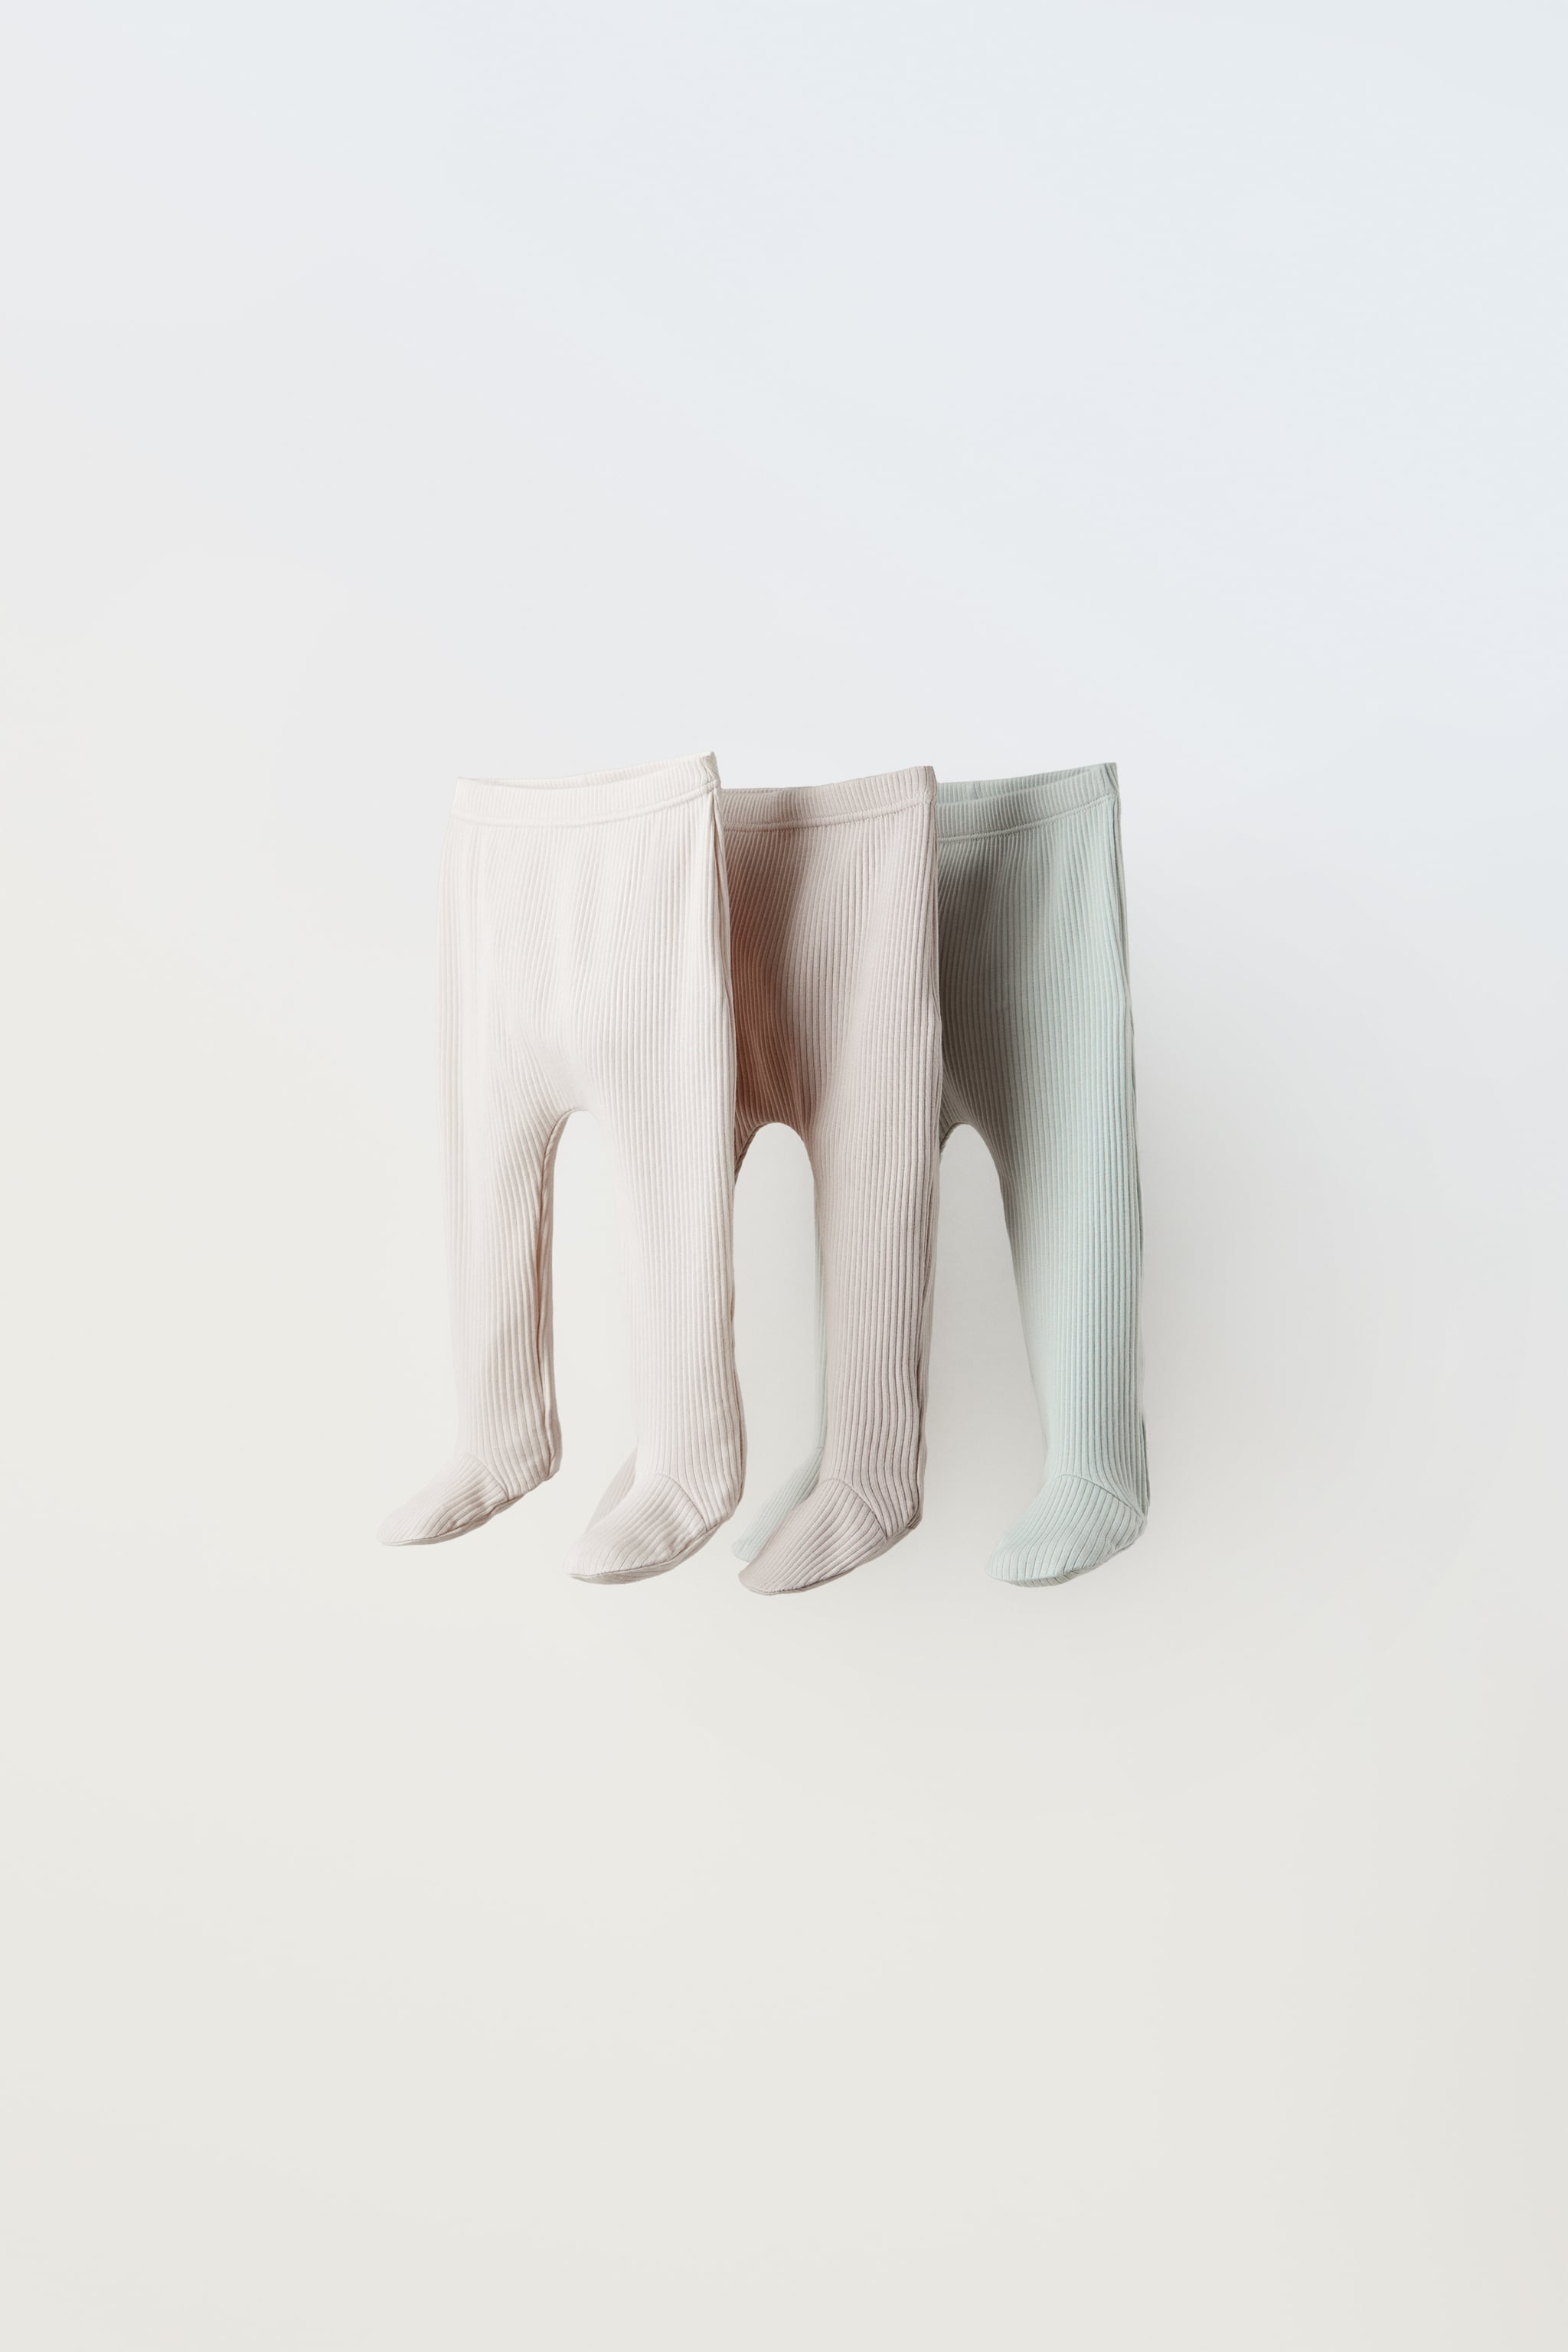 0-9 MONTHS/ THREE PACK OF RIBBED FOOTED LEGGINGS